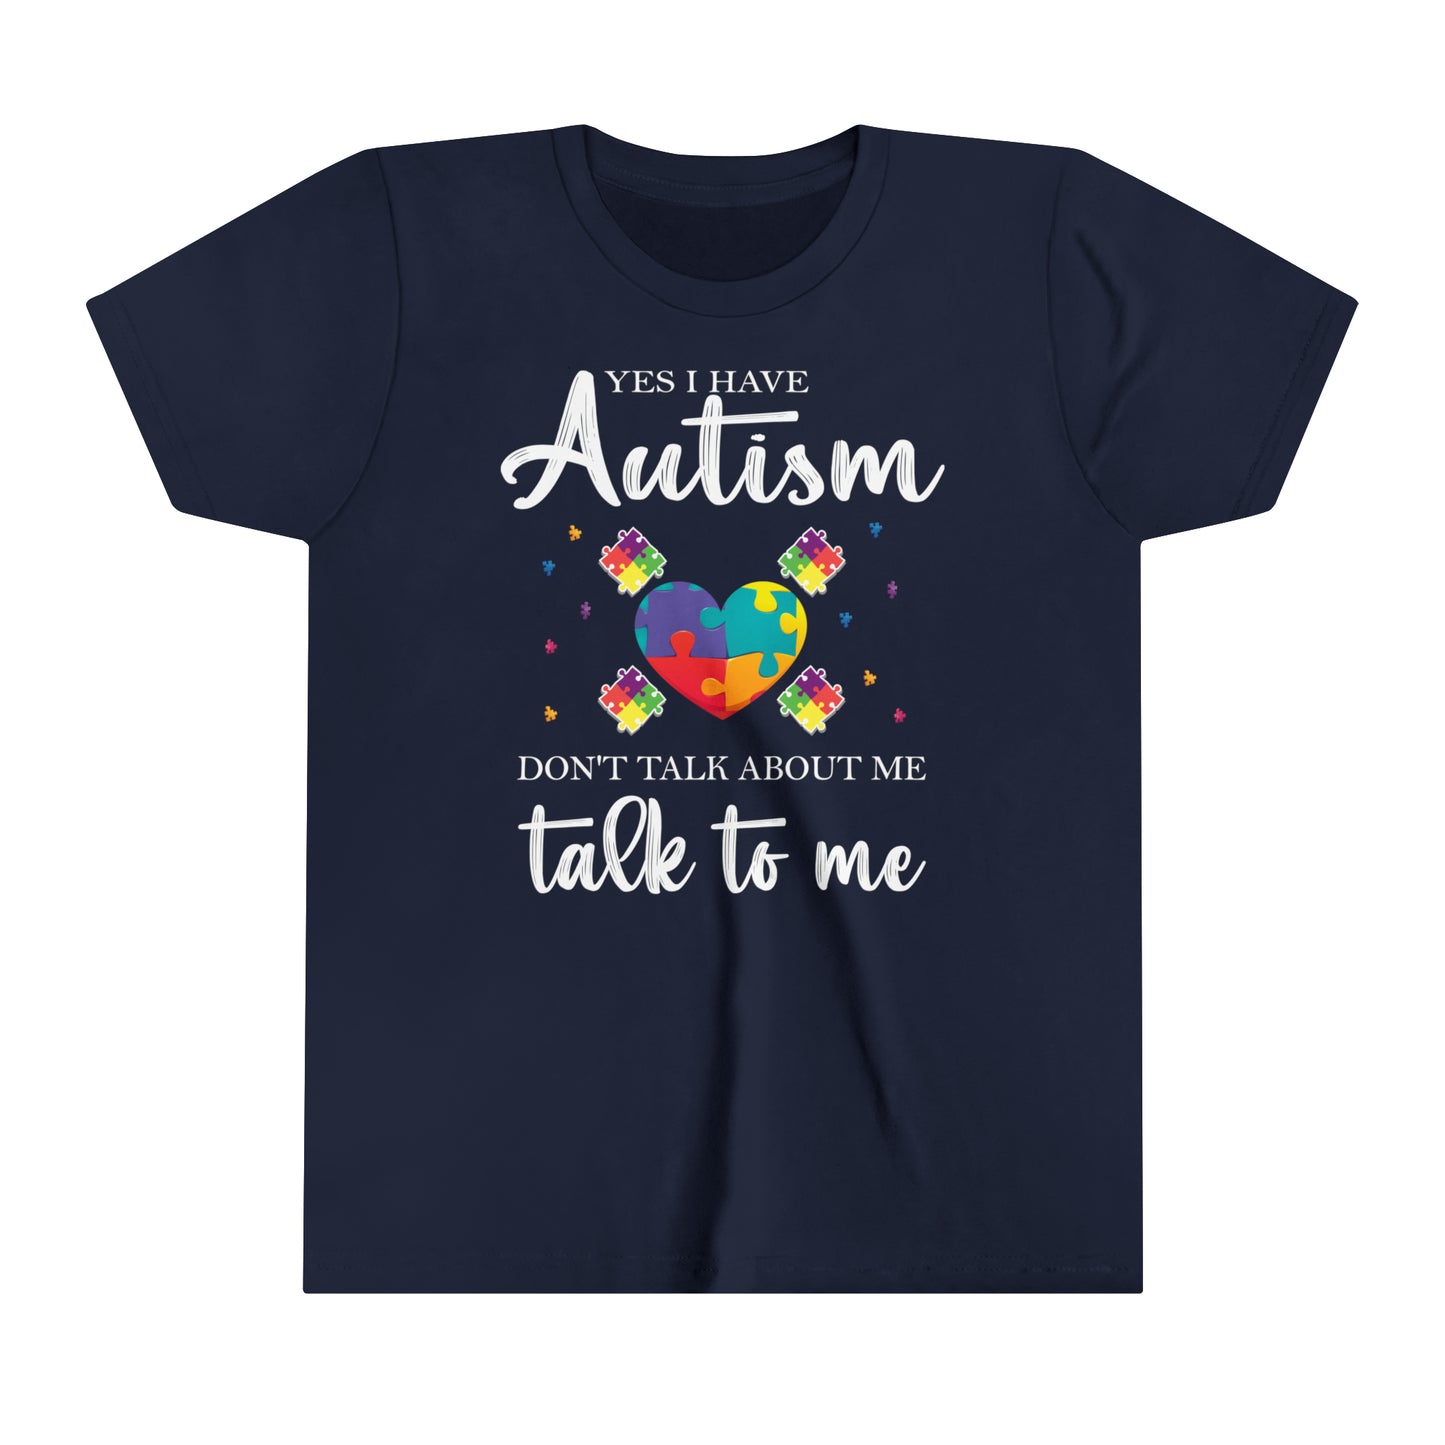 Talk to Me Autism Advocate Youth Shirt